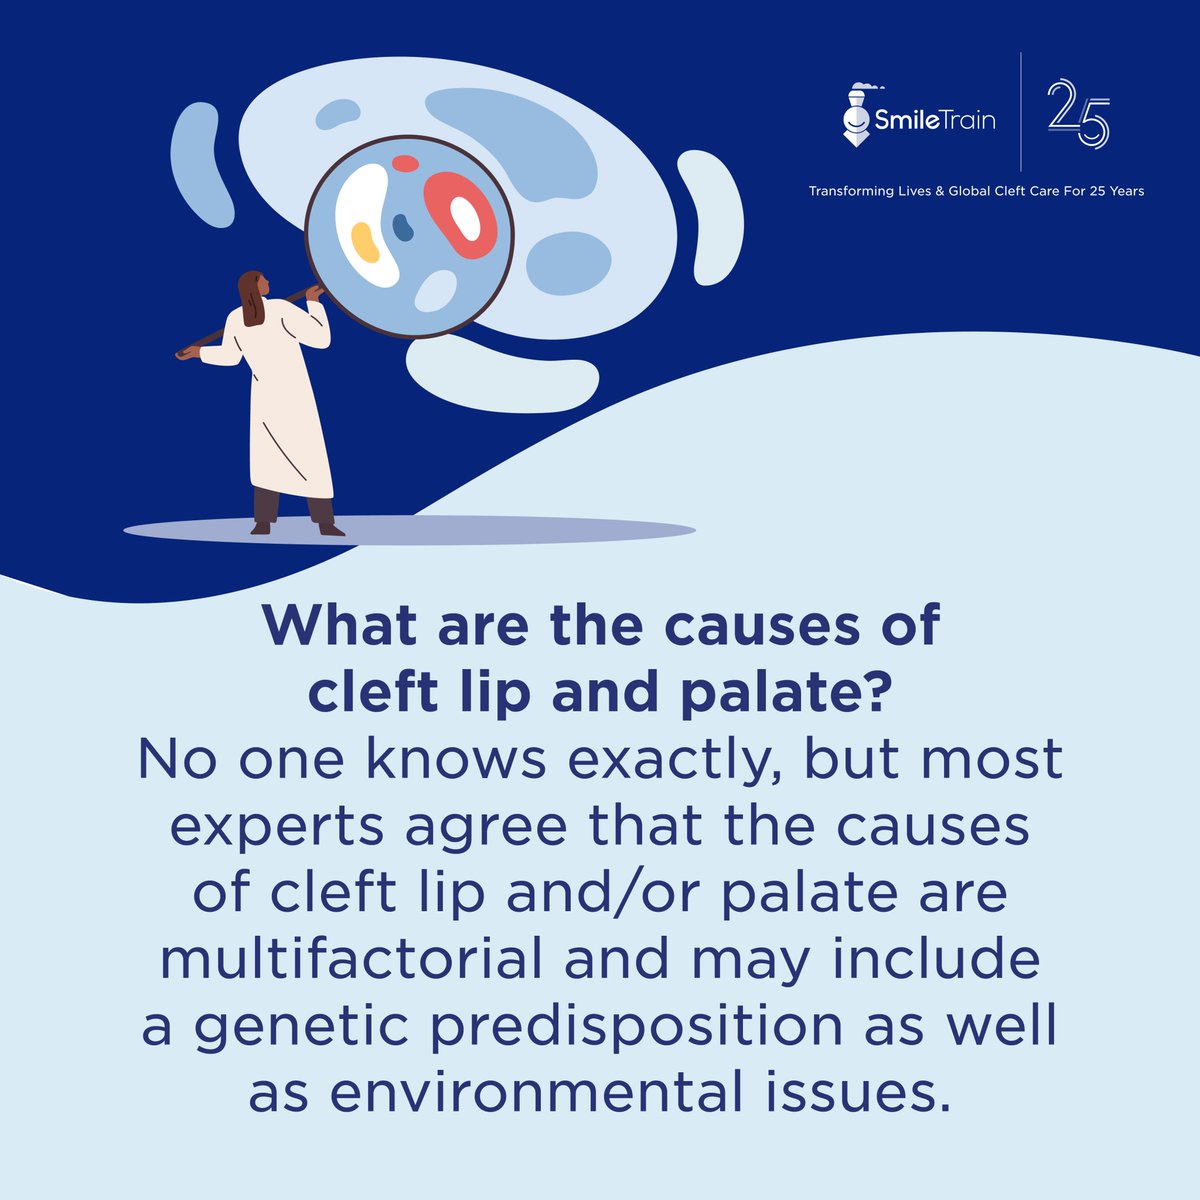 In many communities, there's a lot of stigma surrounding clefts. In reality, there are various factors that could lead to a baby being born with a cleft, and through our work, we aim to disprove the myths and provide the highest level of care. #CleftLipAndPalateAwarenessWeek